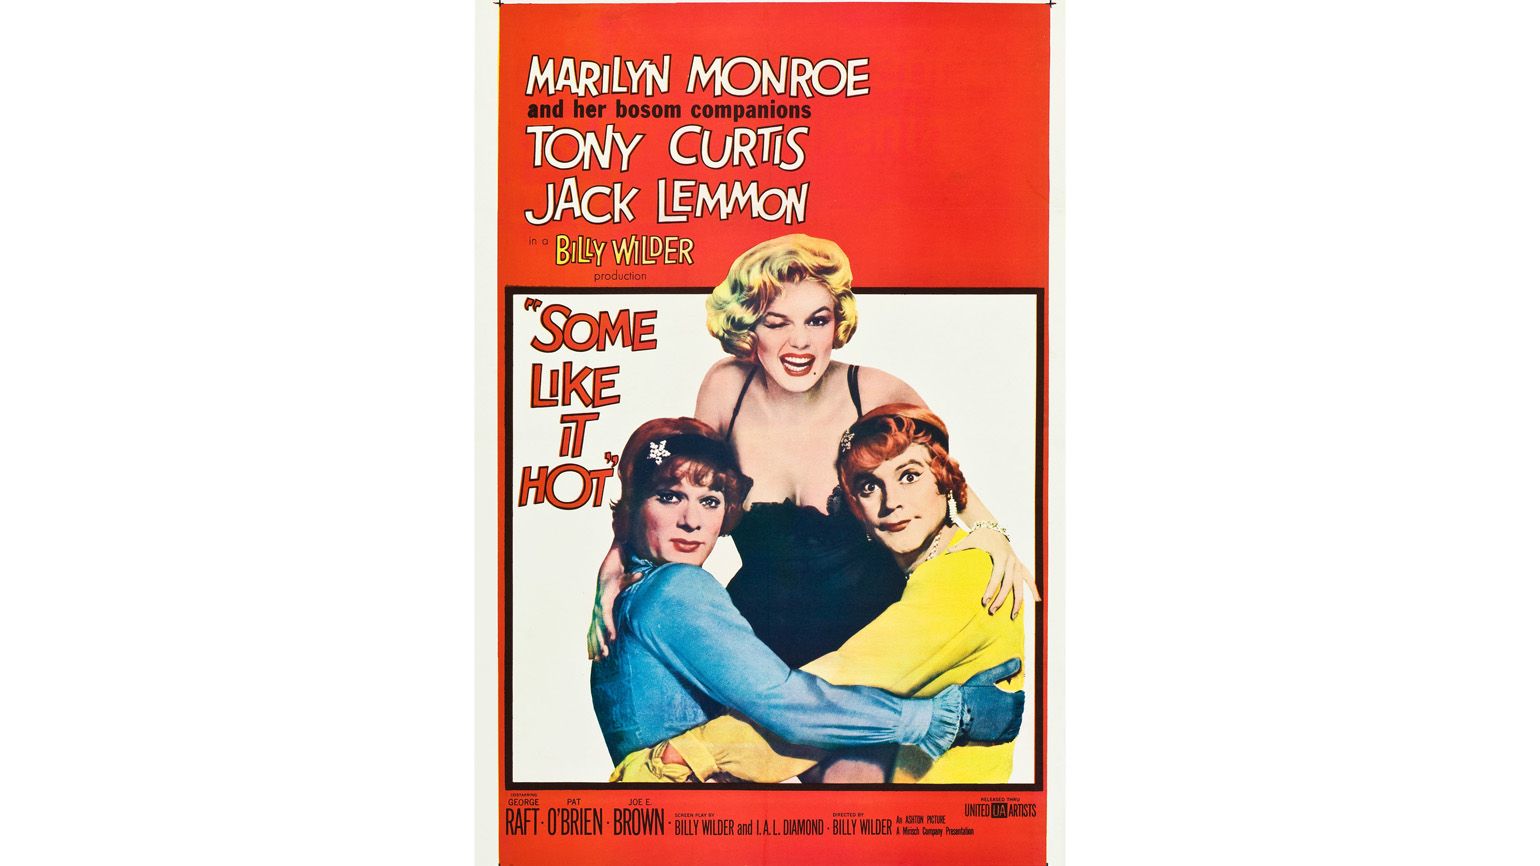 Theatrical poster for the release of the 1959 film Some Like It Hot.